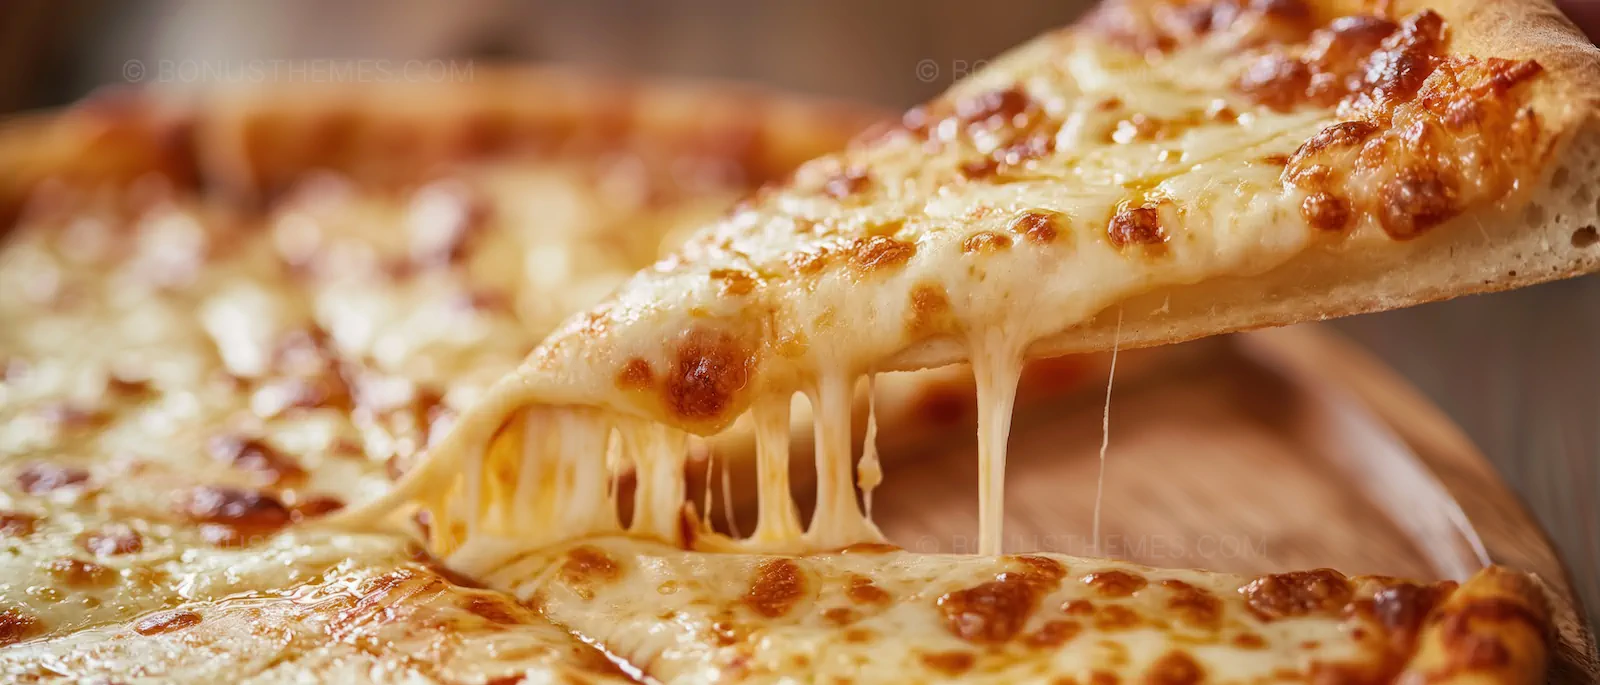 Cheese lover's dream, irresistible pizza bliss